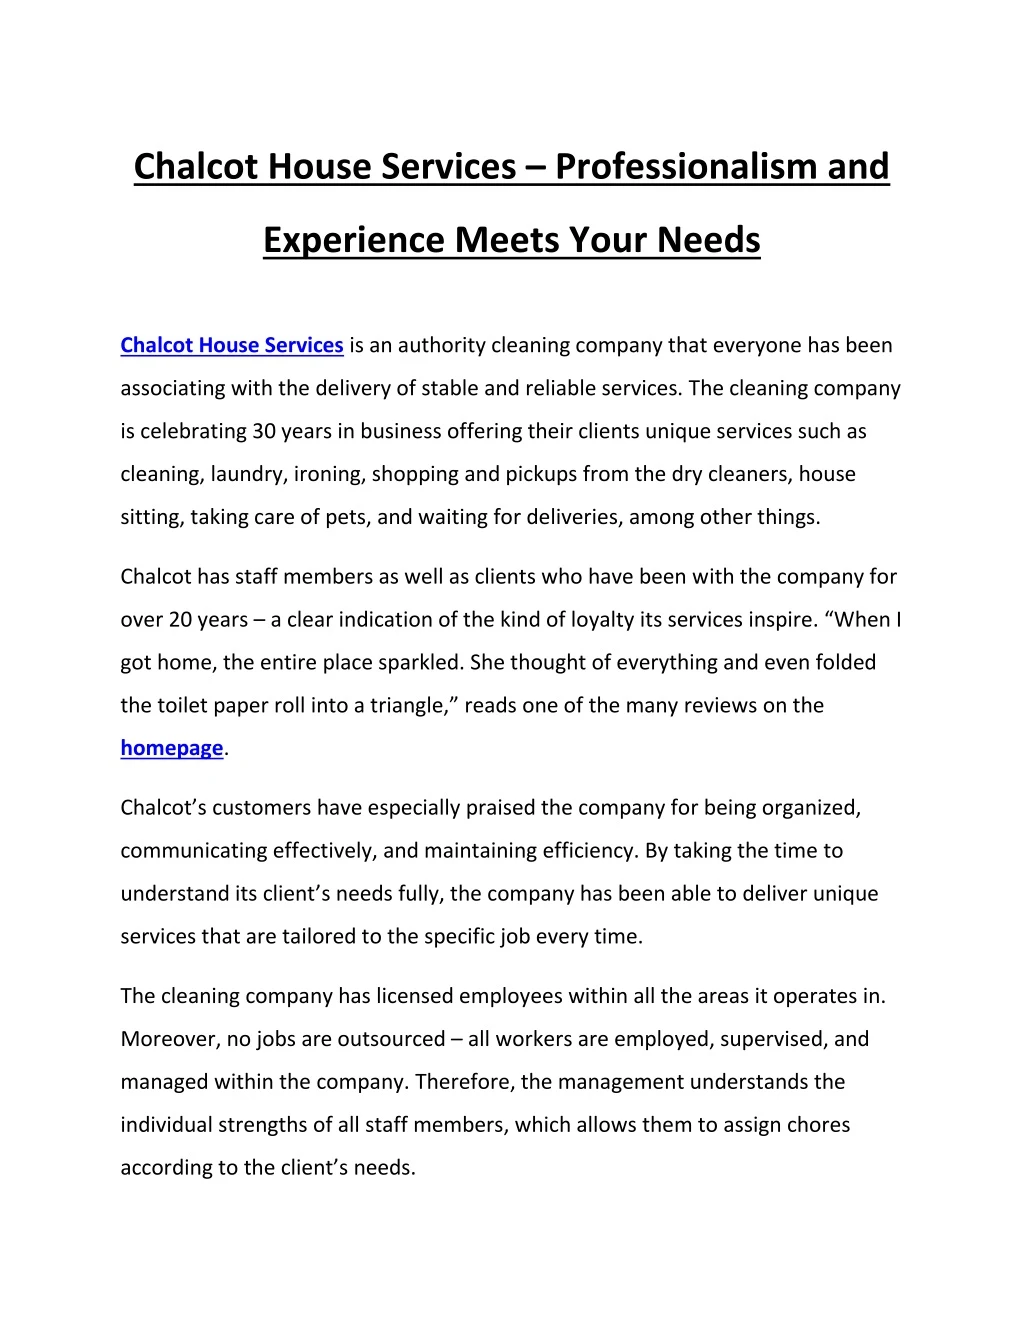 chalcot house services professionalism and